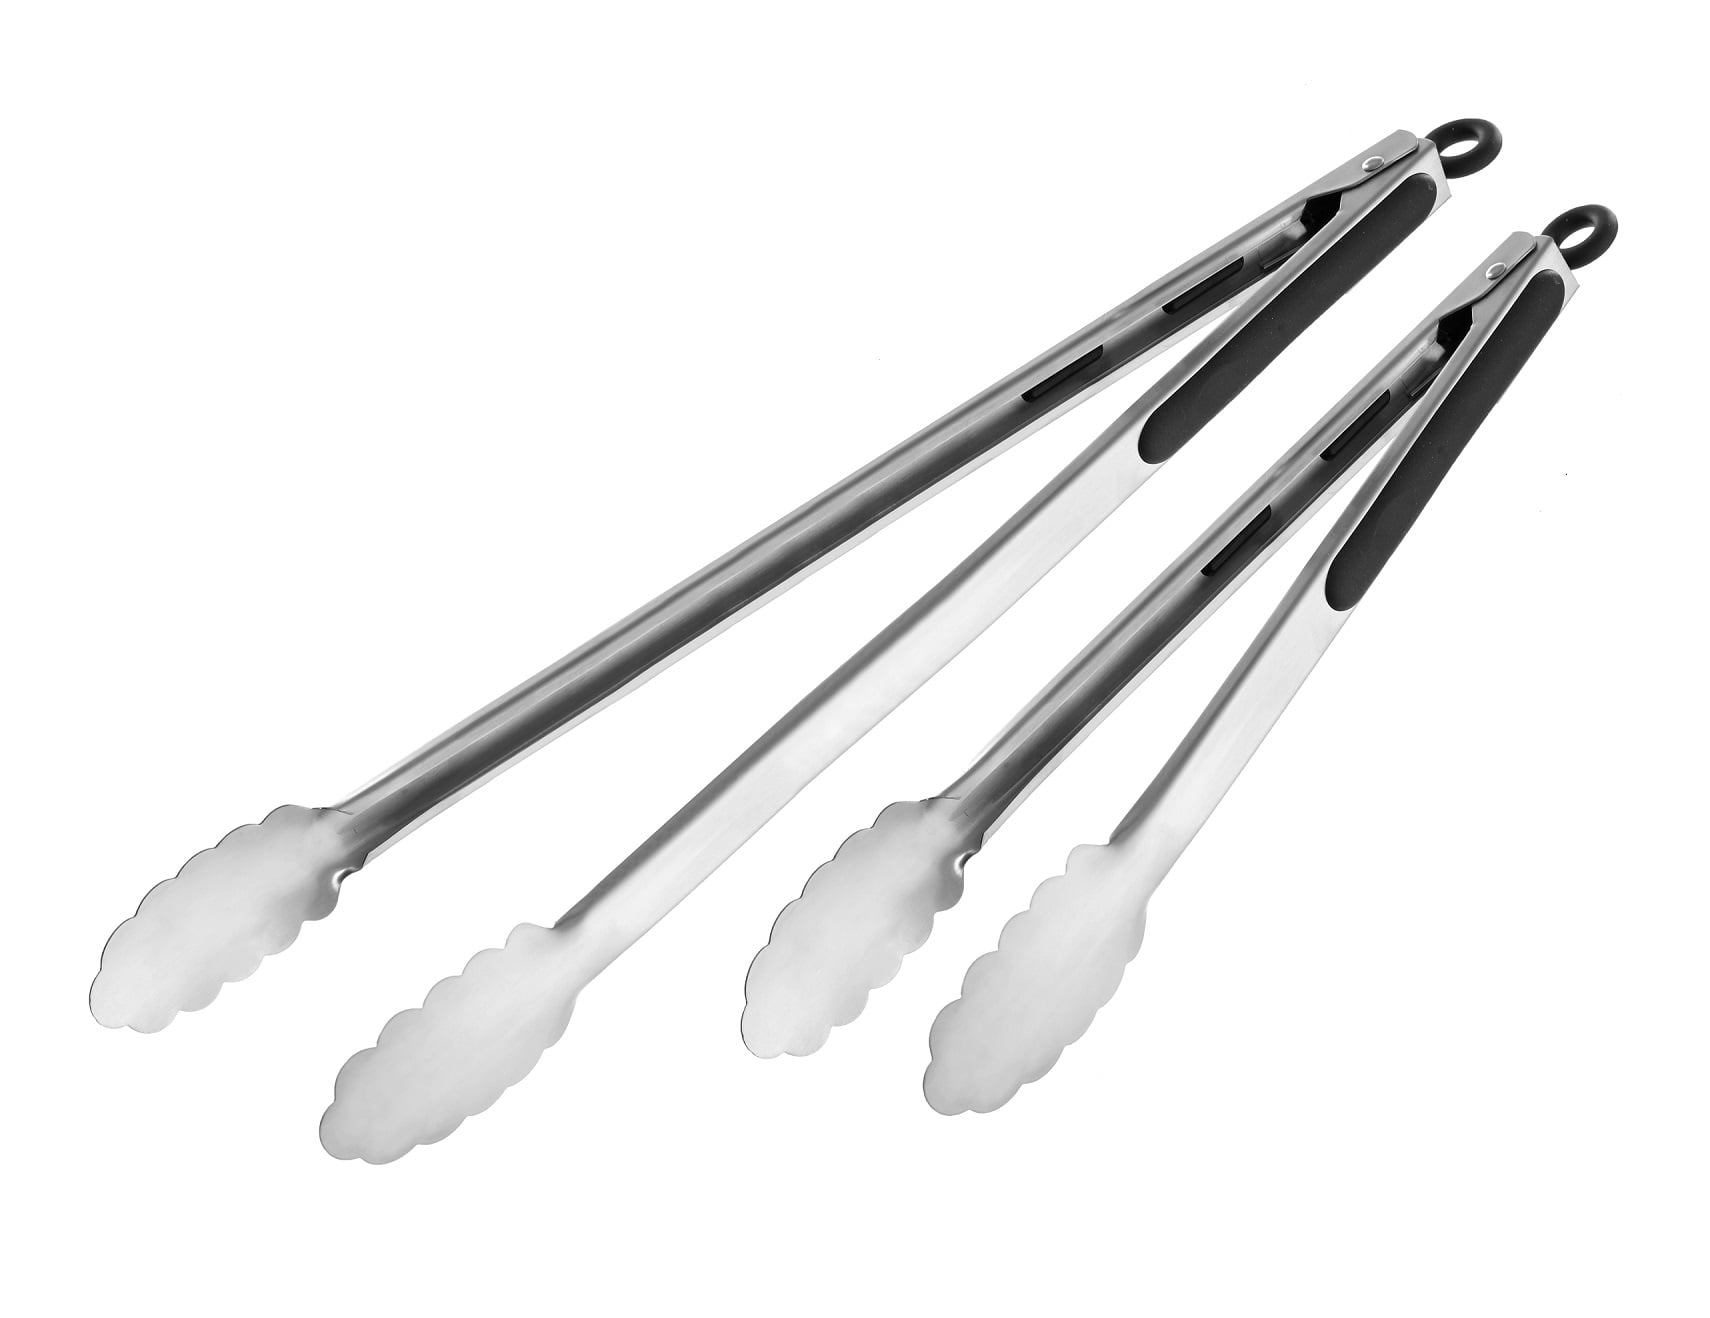 Stainless Steel Tongs - Blackstone's of Beacon Hill